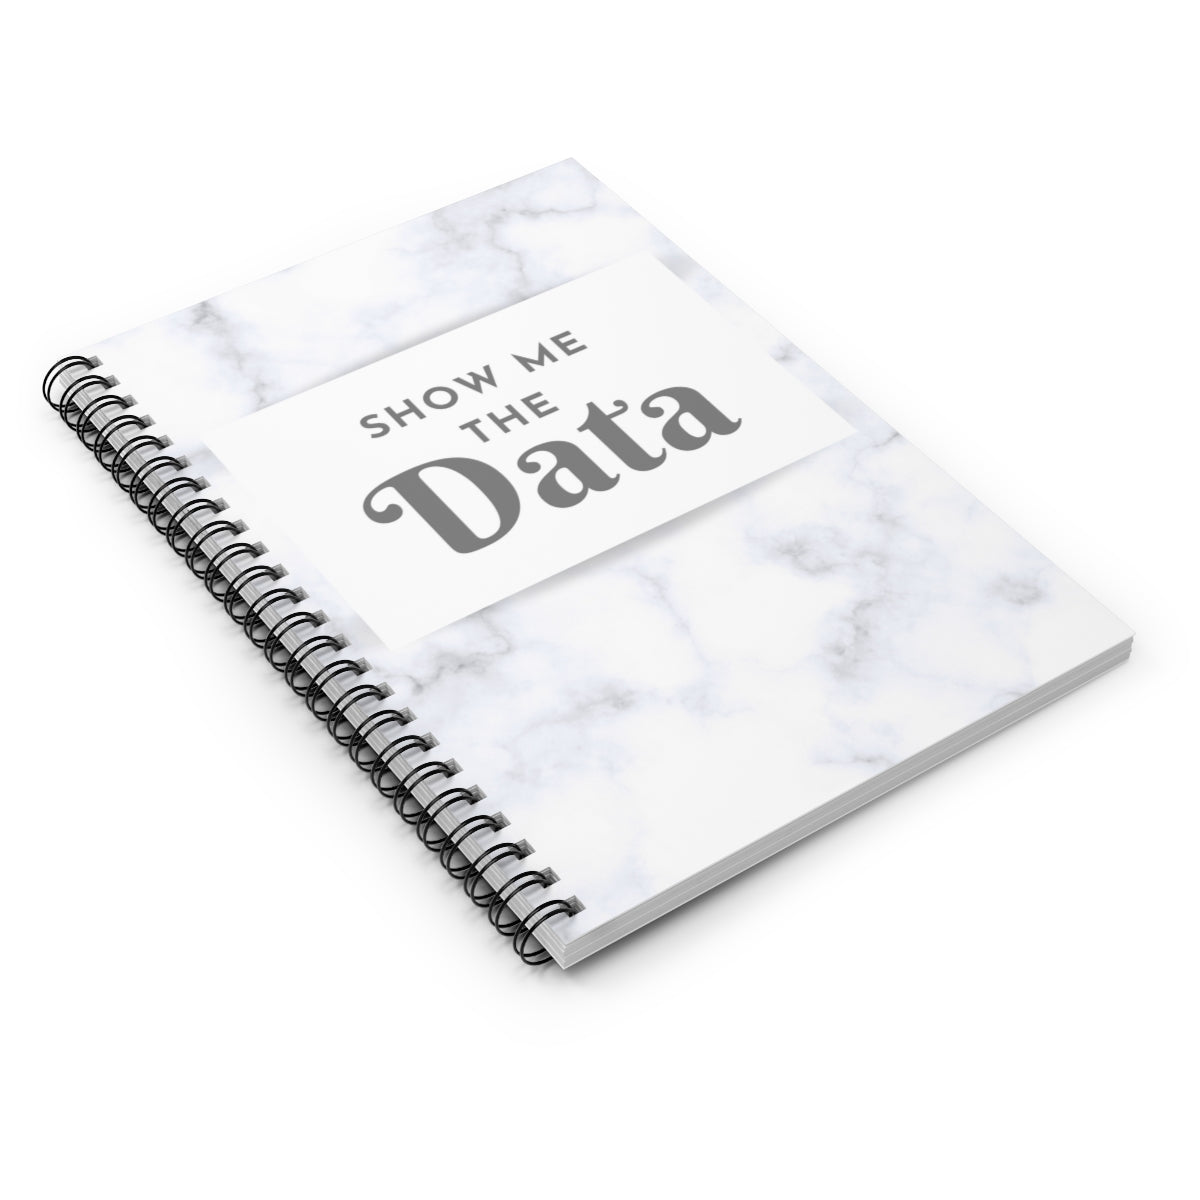 Show me the Data Spiral Notebook - Ruled Line